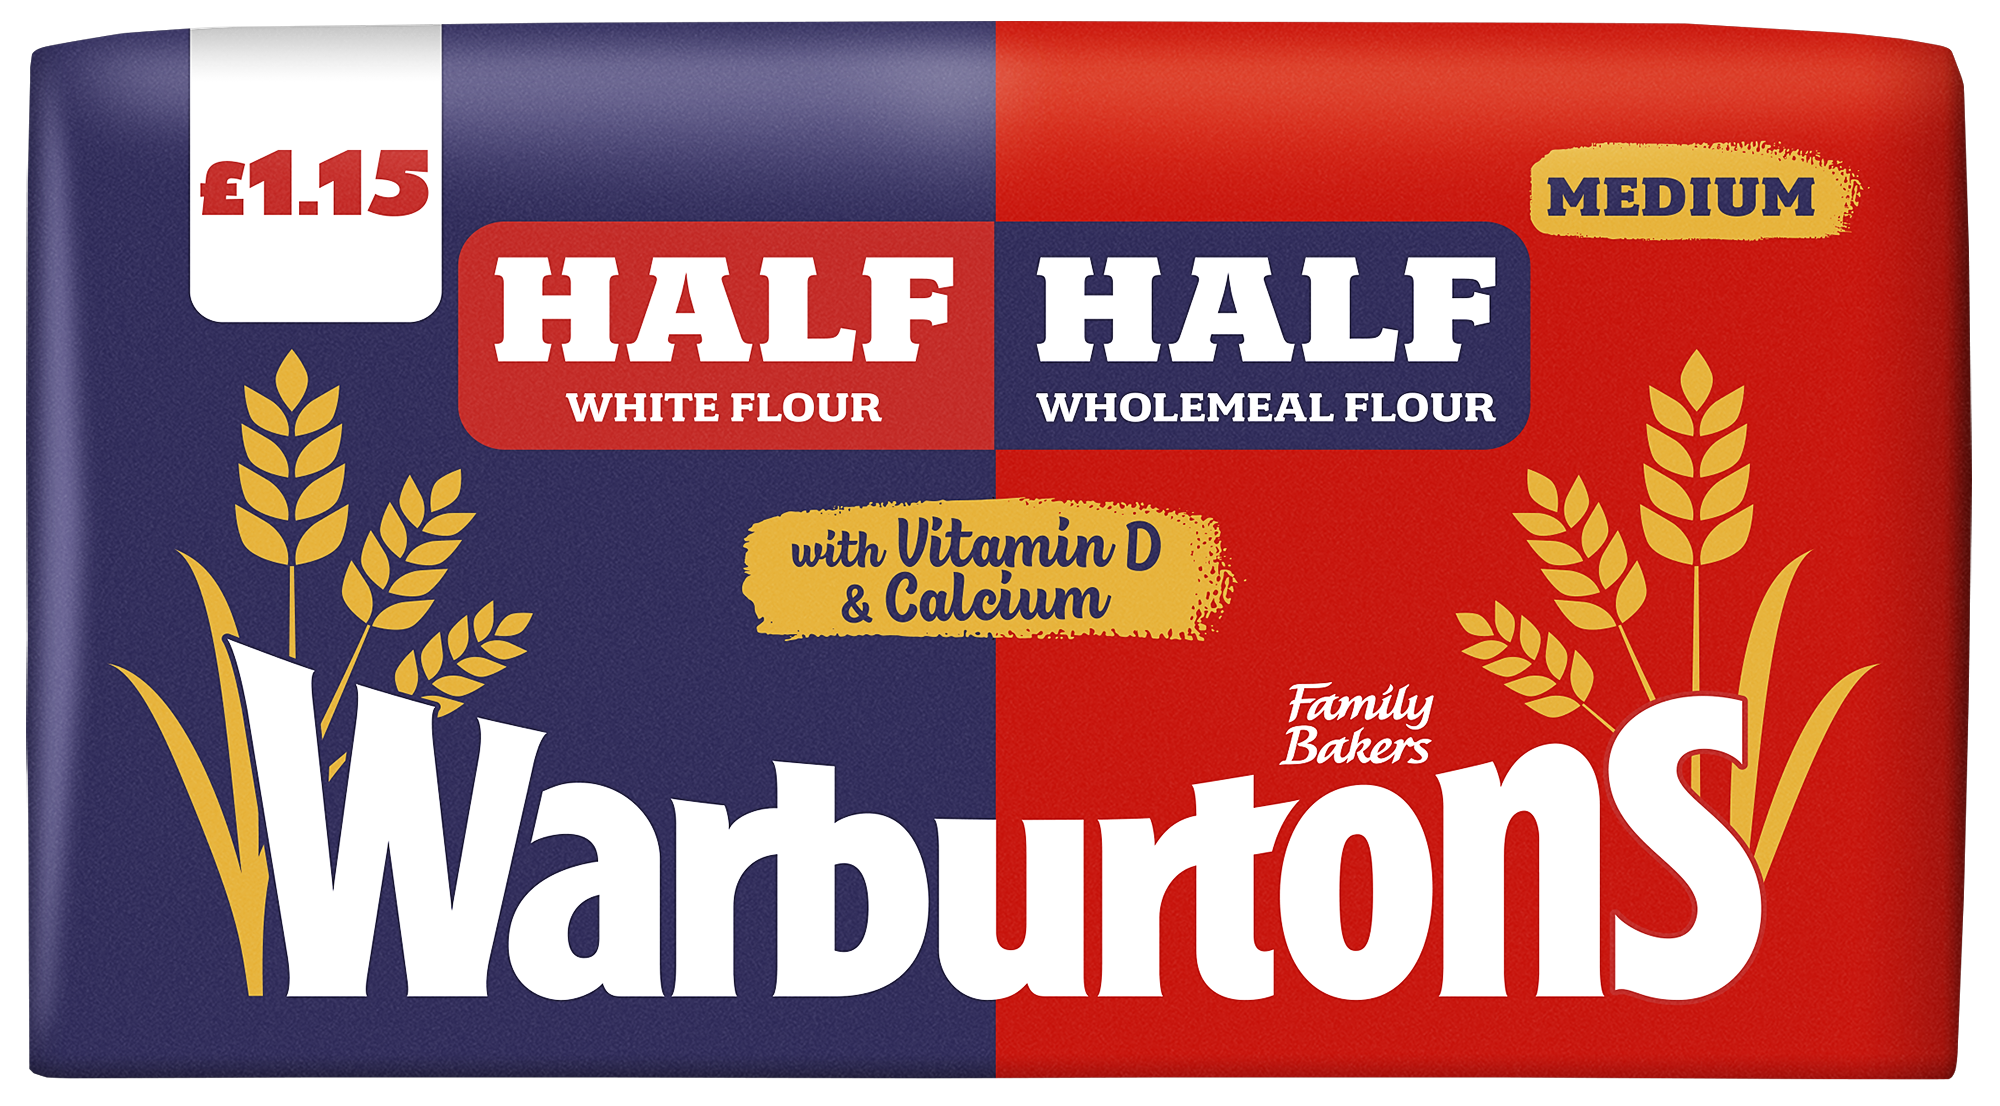 Warburtons launches campaign to raise awareness of Vitamin D deficiency risk